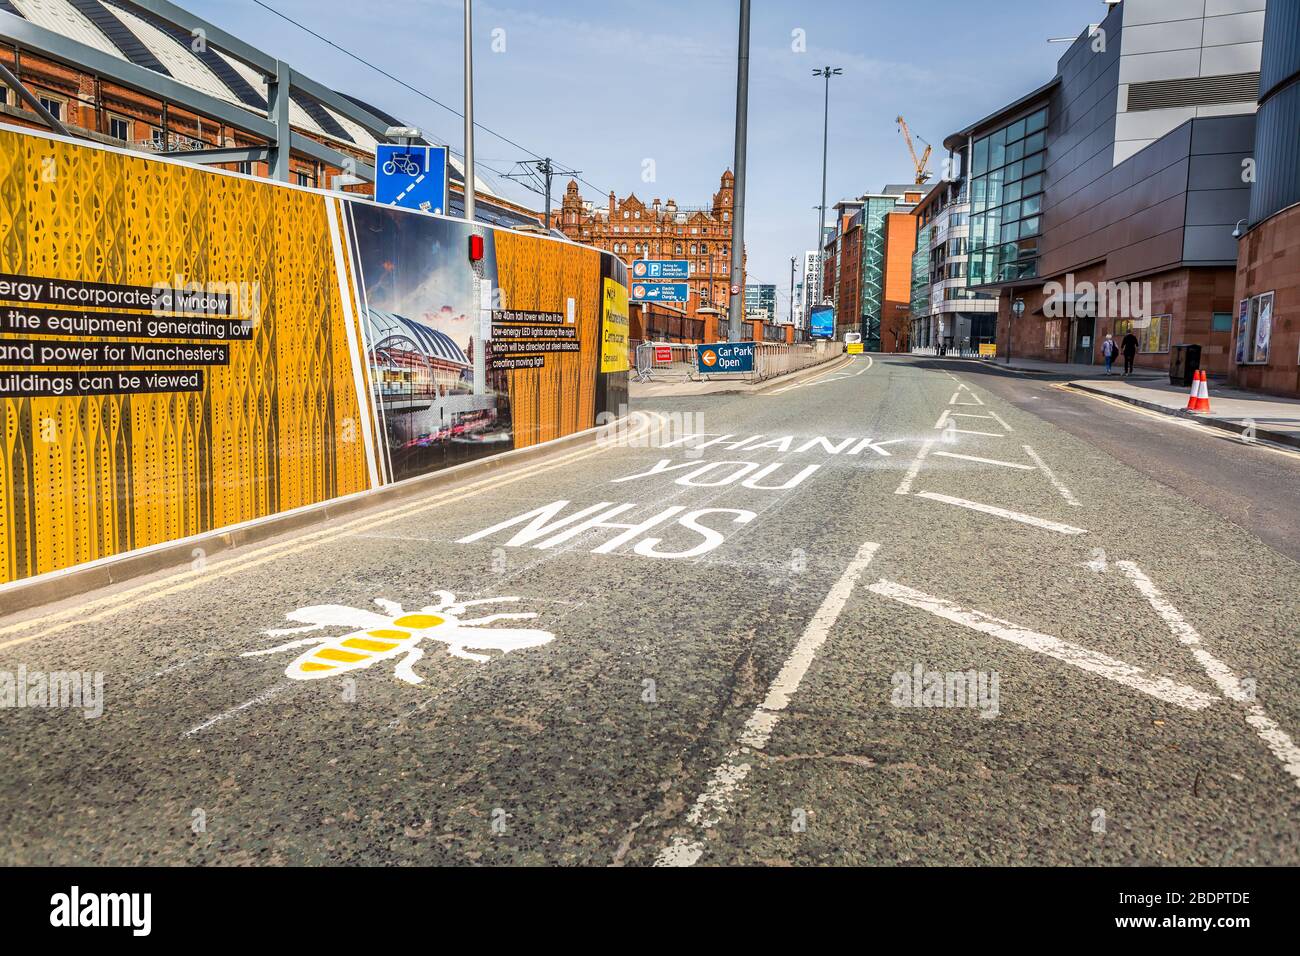 Thanks You NHS Road Markings at NHS Nightingale Hospital North West, Manchester, United Kingdom during Coronavirus Outbreak, April 2020. Stock Photo